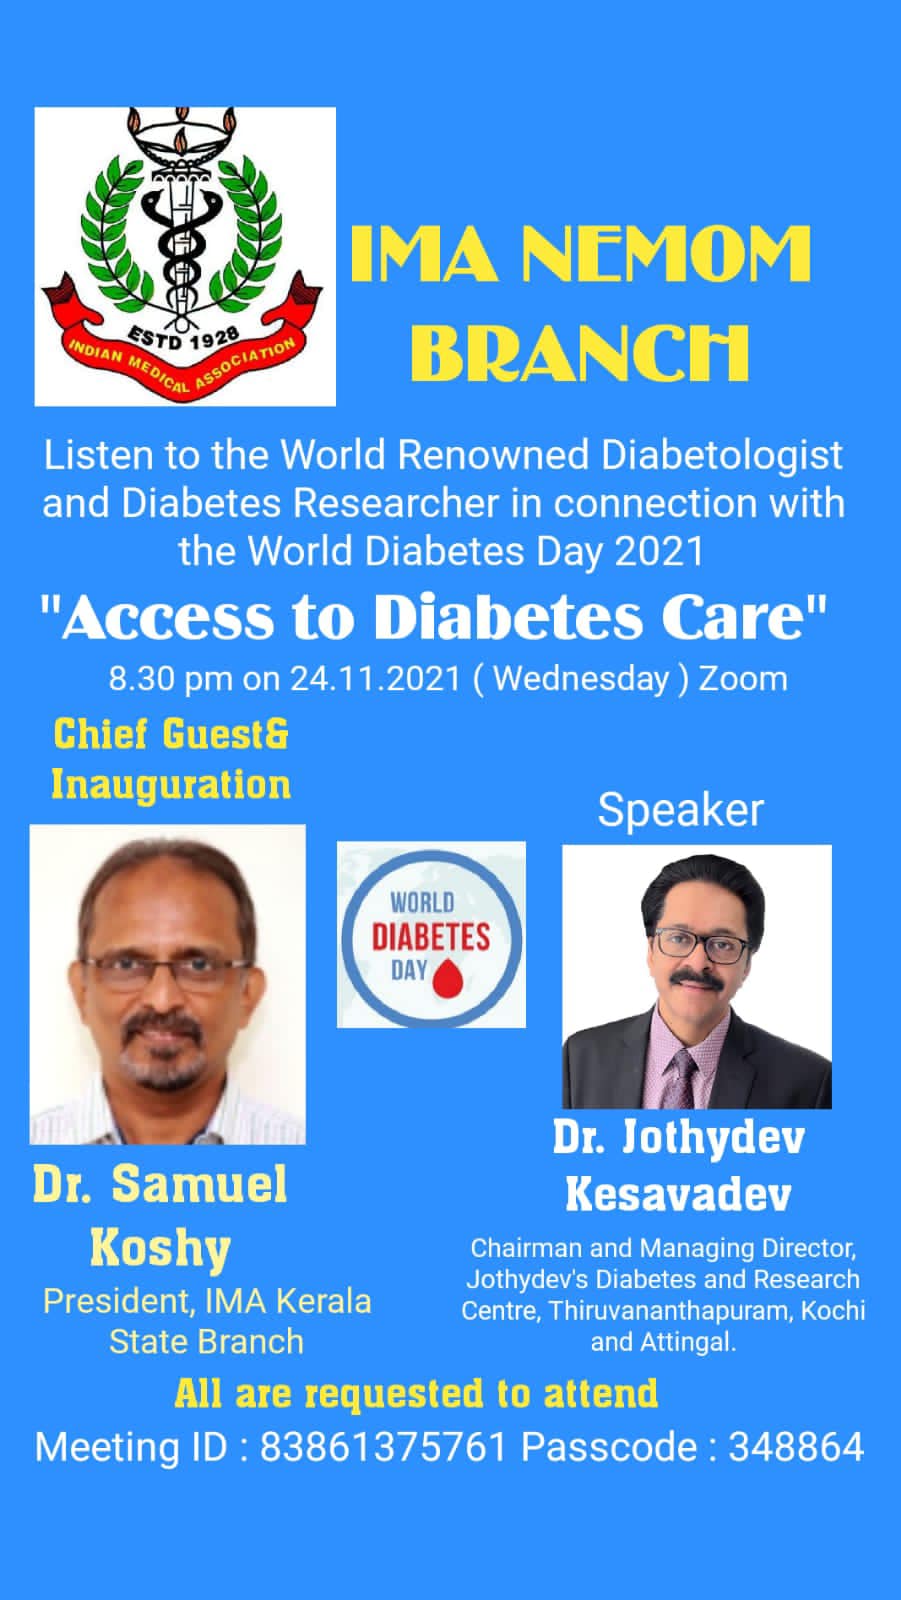  Panel Discussion on Access to Diabetes Care